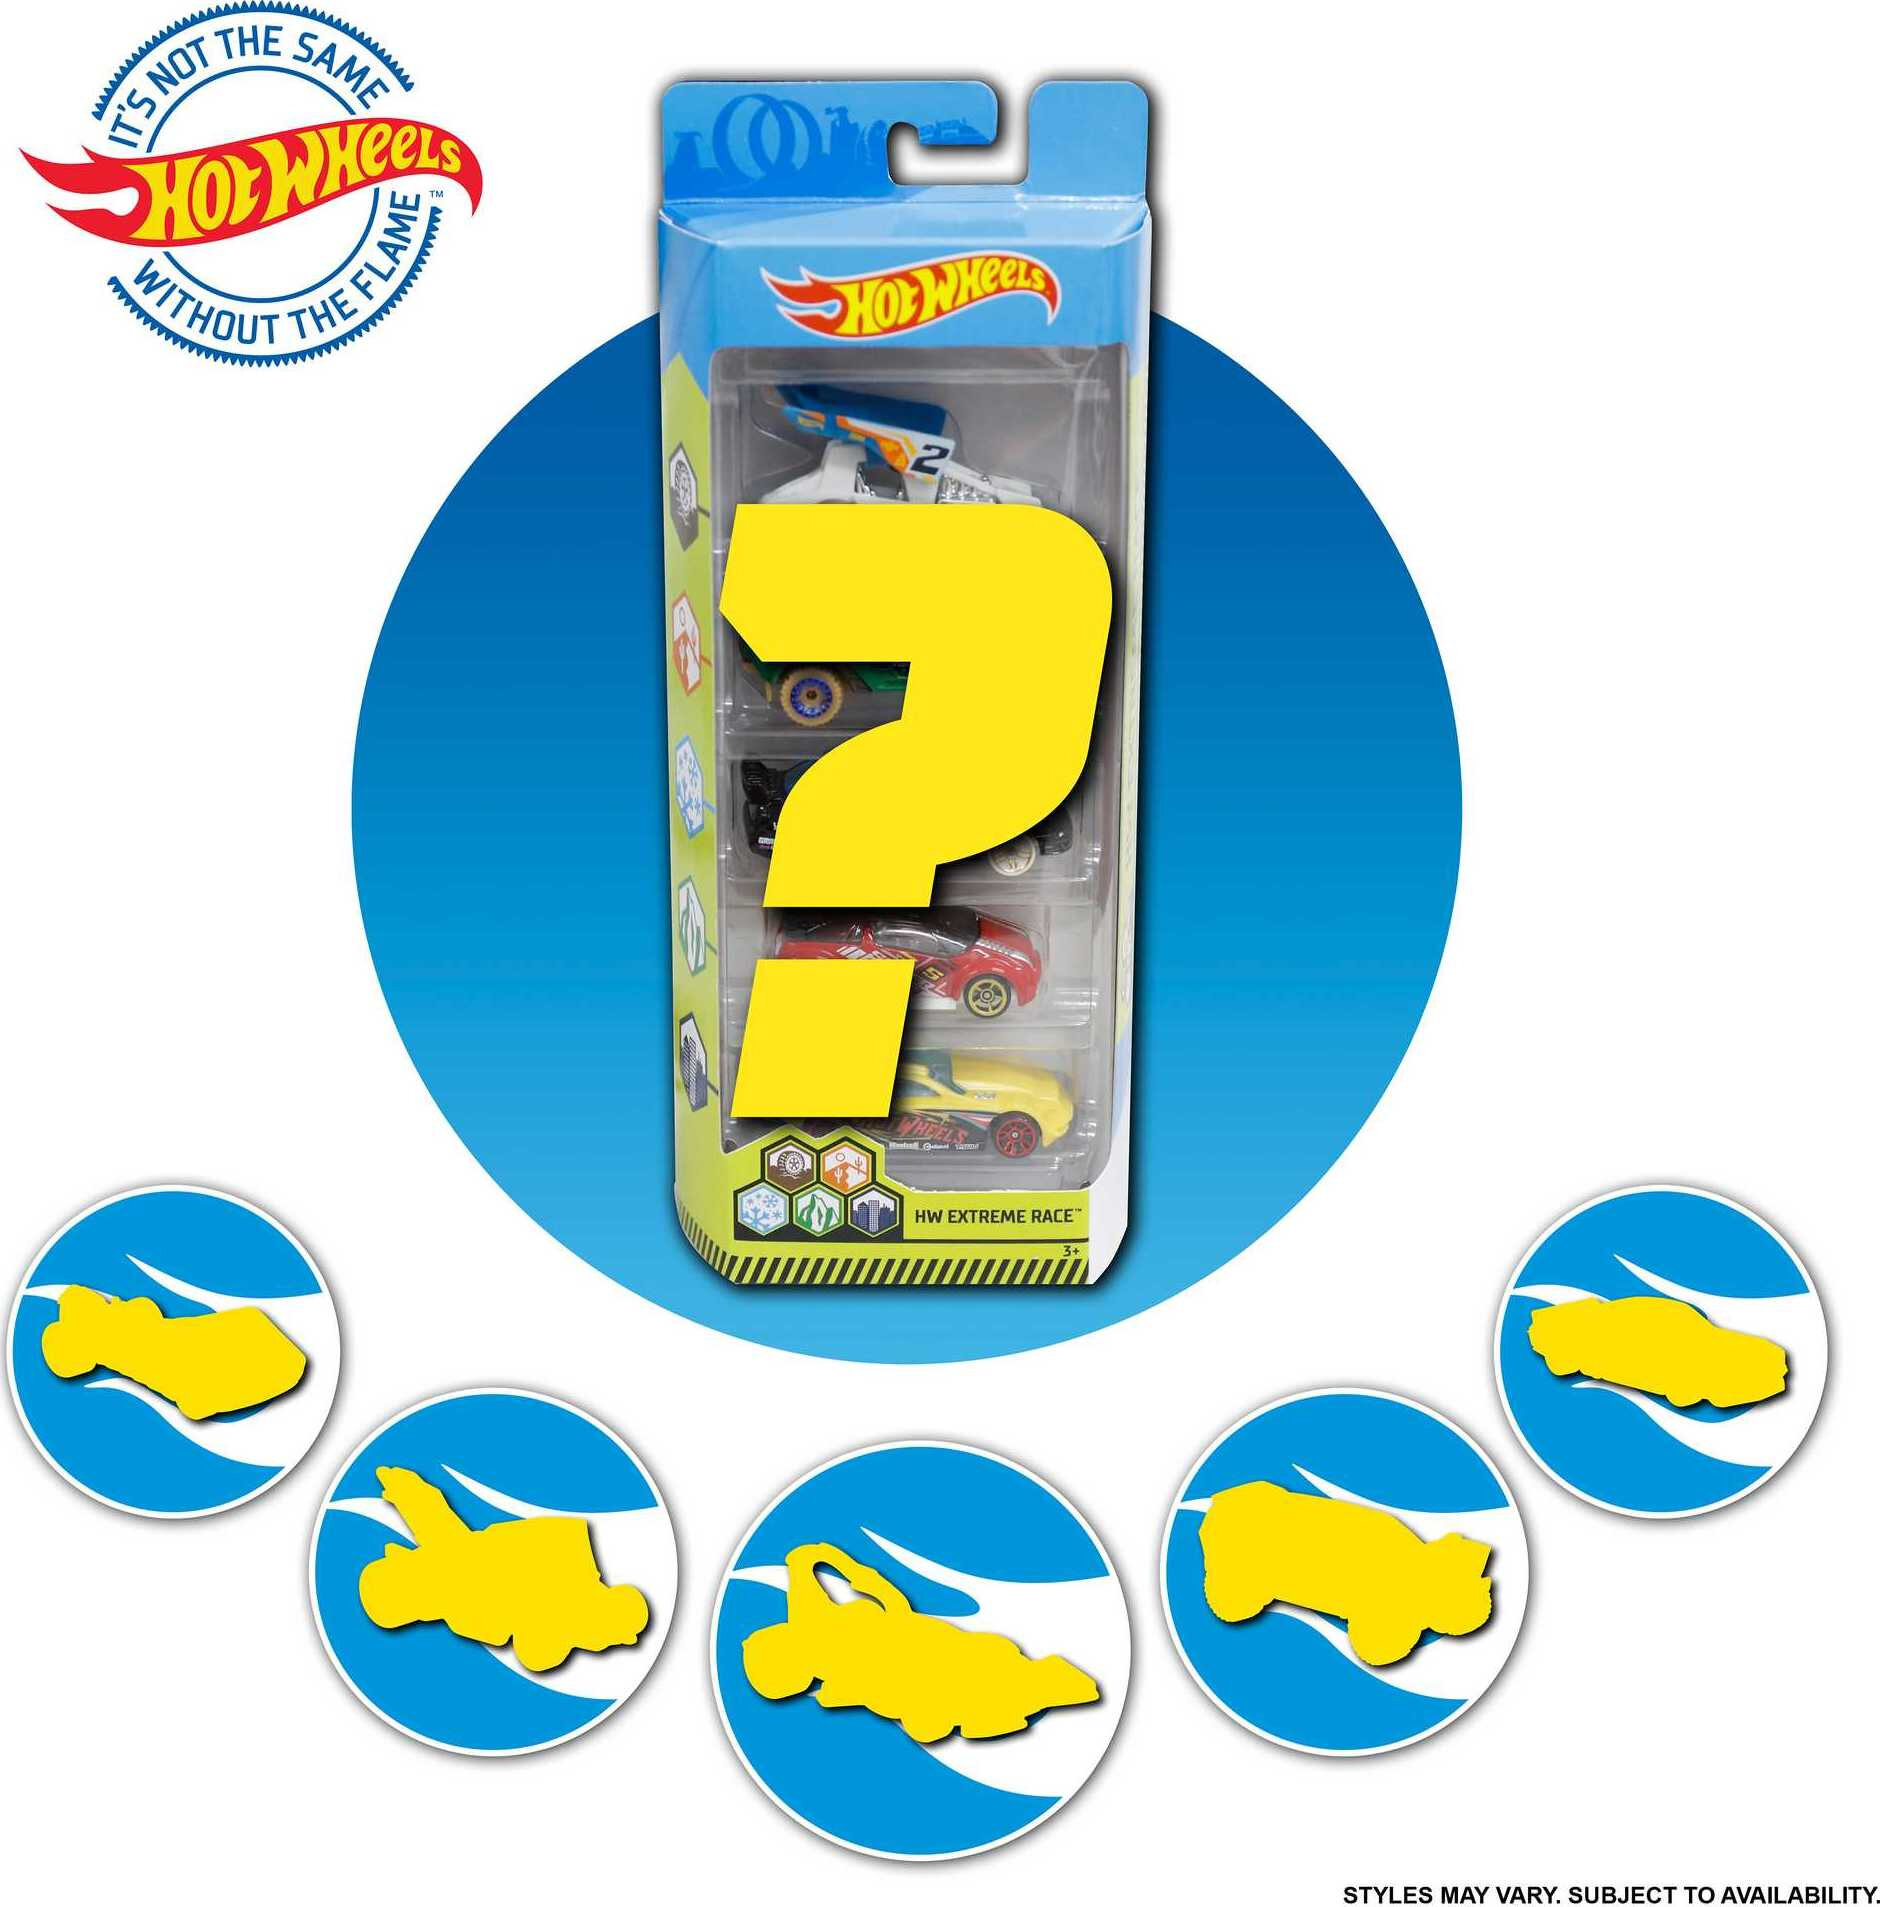 Hot Wheels Cars, 5-Pack of Die-Cast Toy Cars or Trucks in 1:64 Scale (Styles May Vary) - image 3 of 7